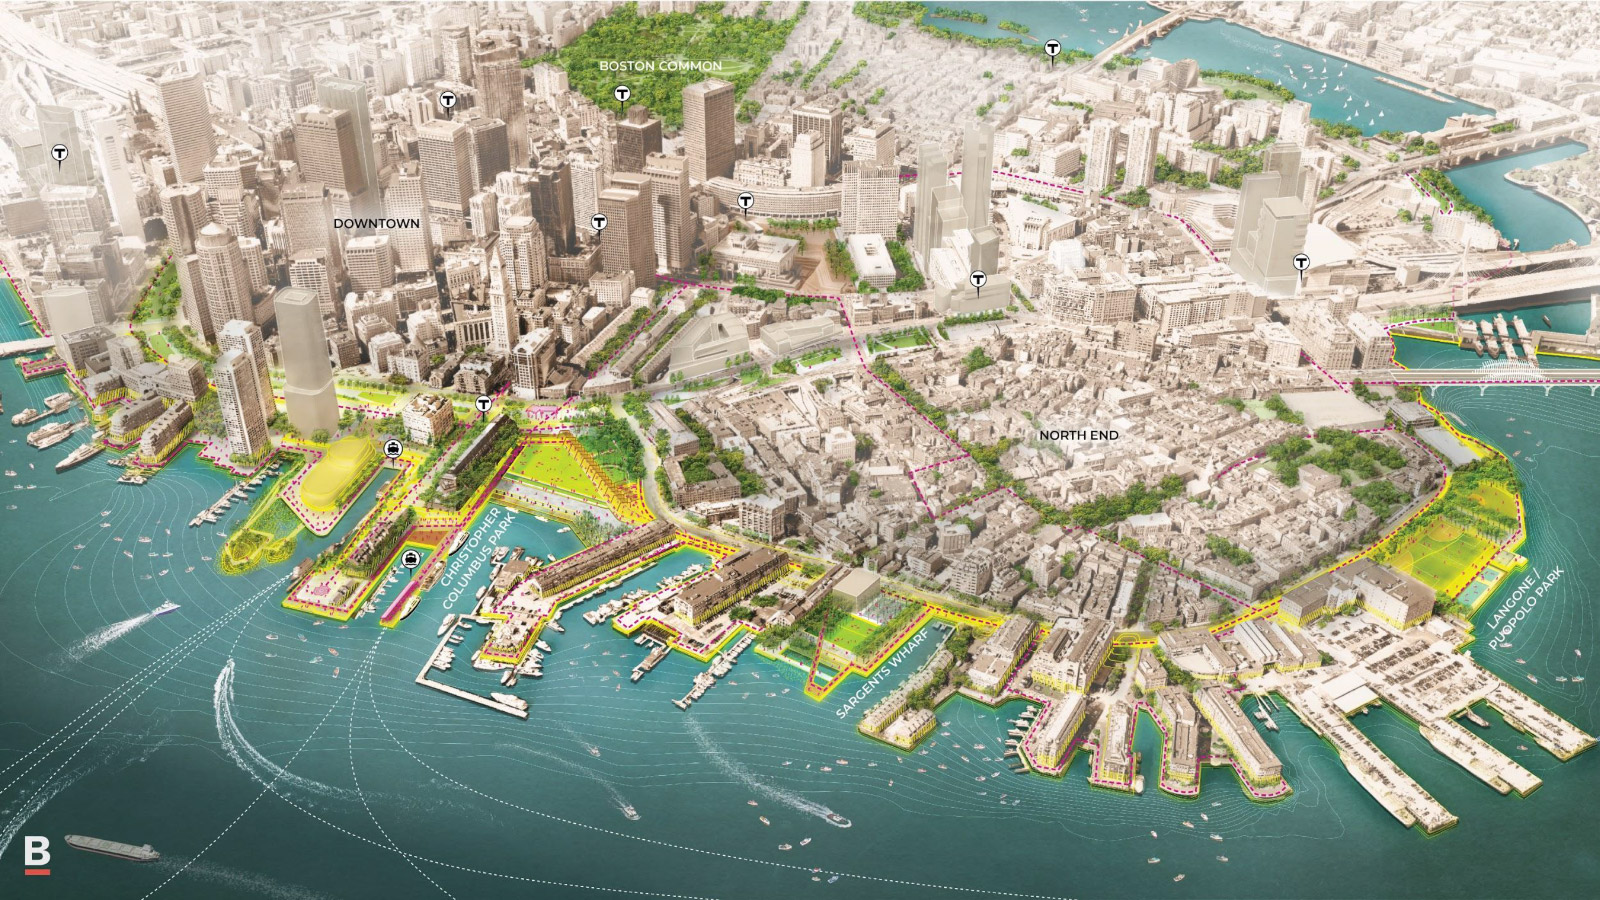 A potential vision of a resilient downtown Boston.